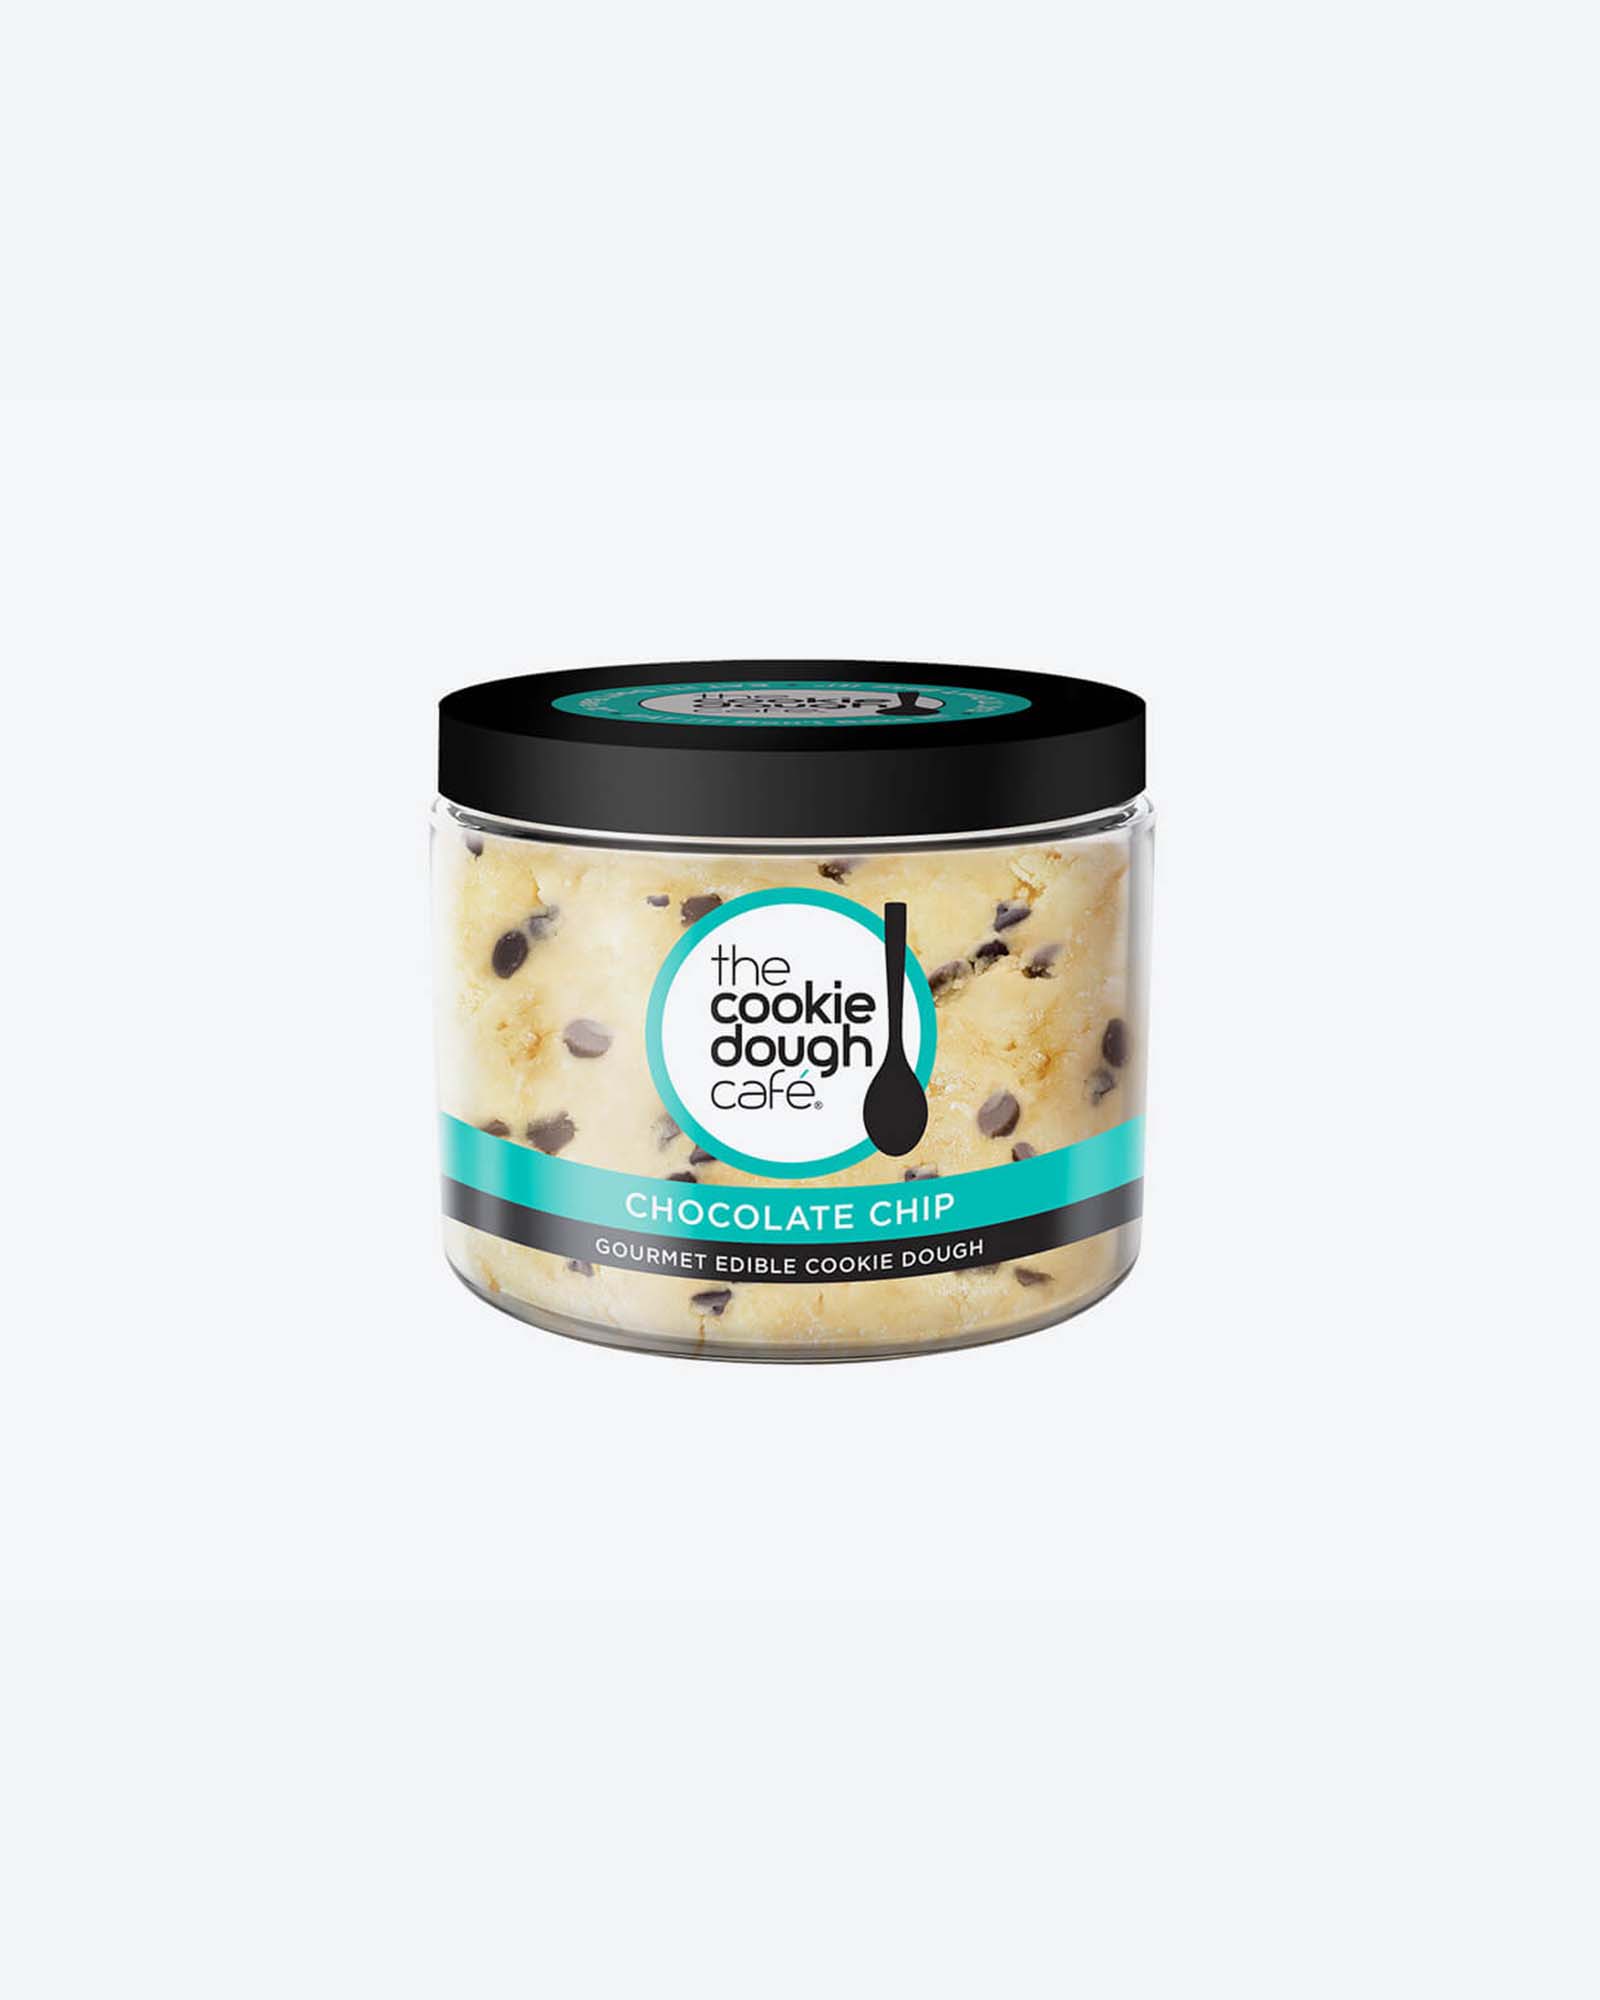 Play-Doh Cookie Canister - Chocolate Chip